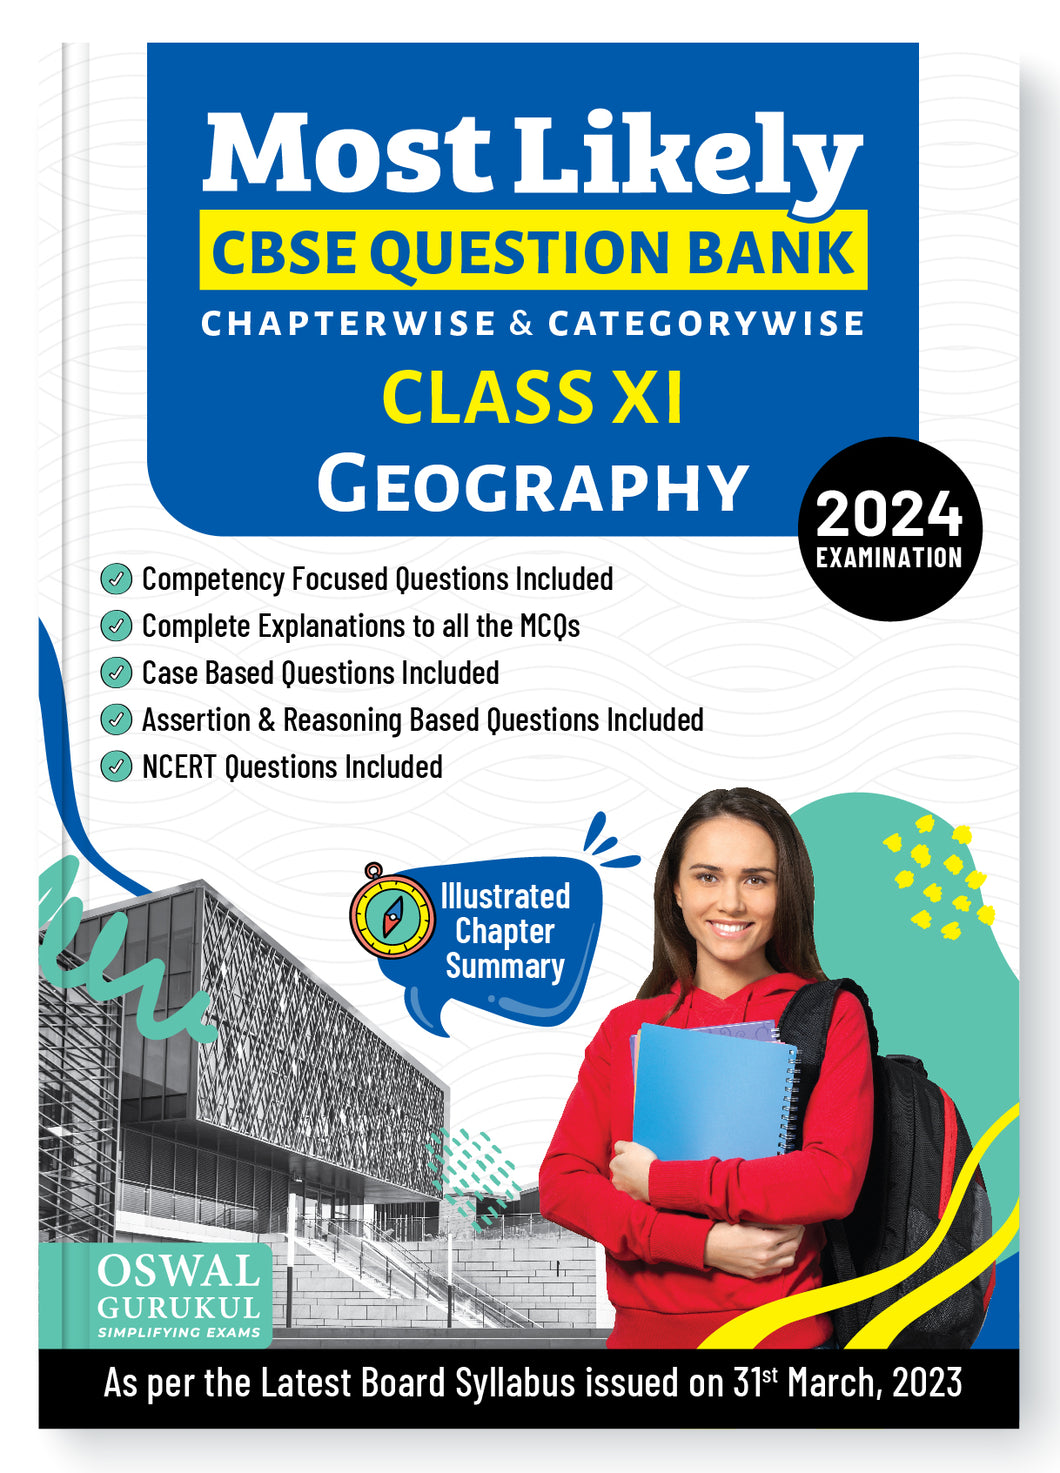 Oswal - Gurukul Geography Most Likely CBSE Question Bank : Class 11 Exam 2024